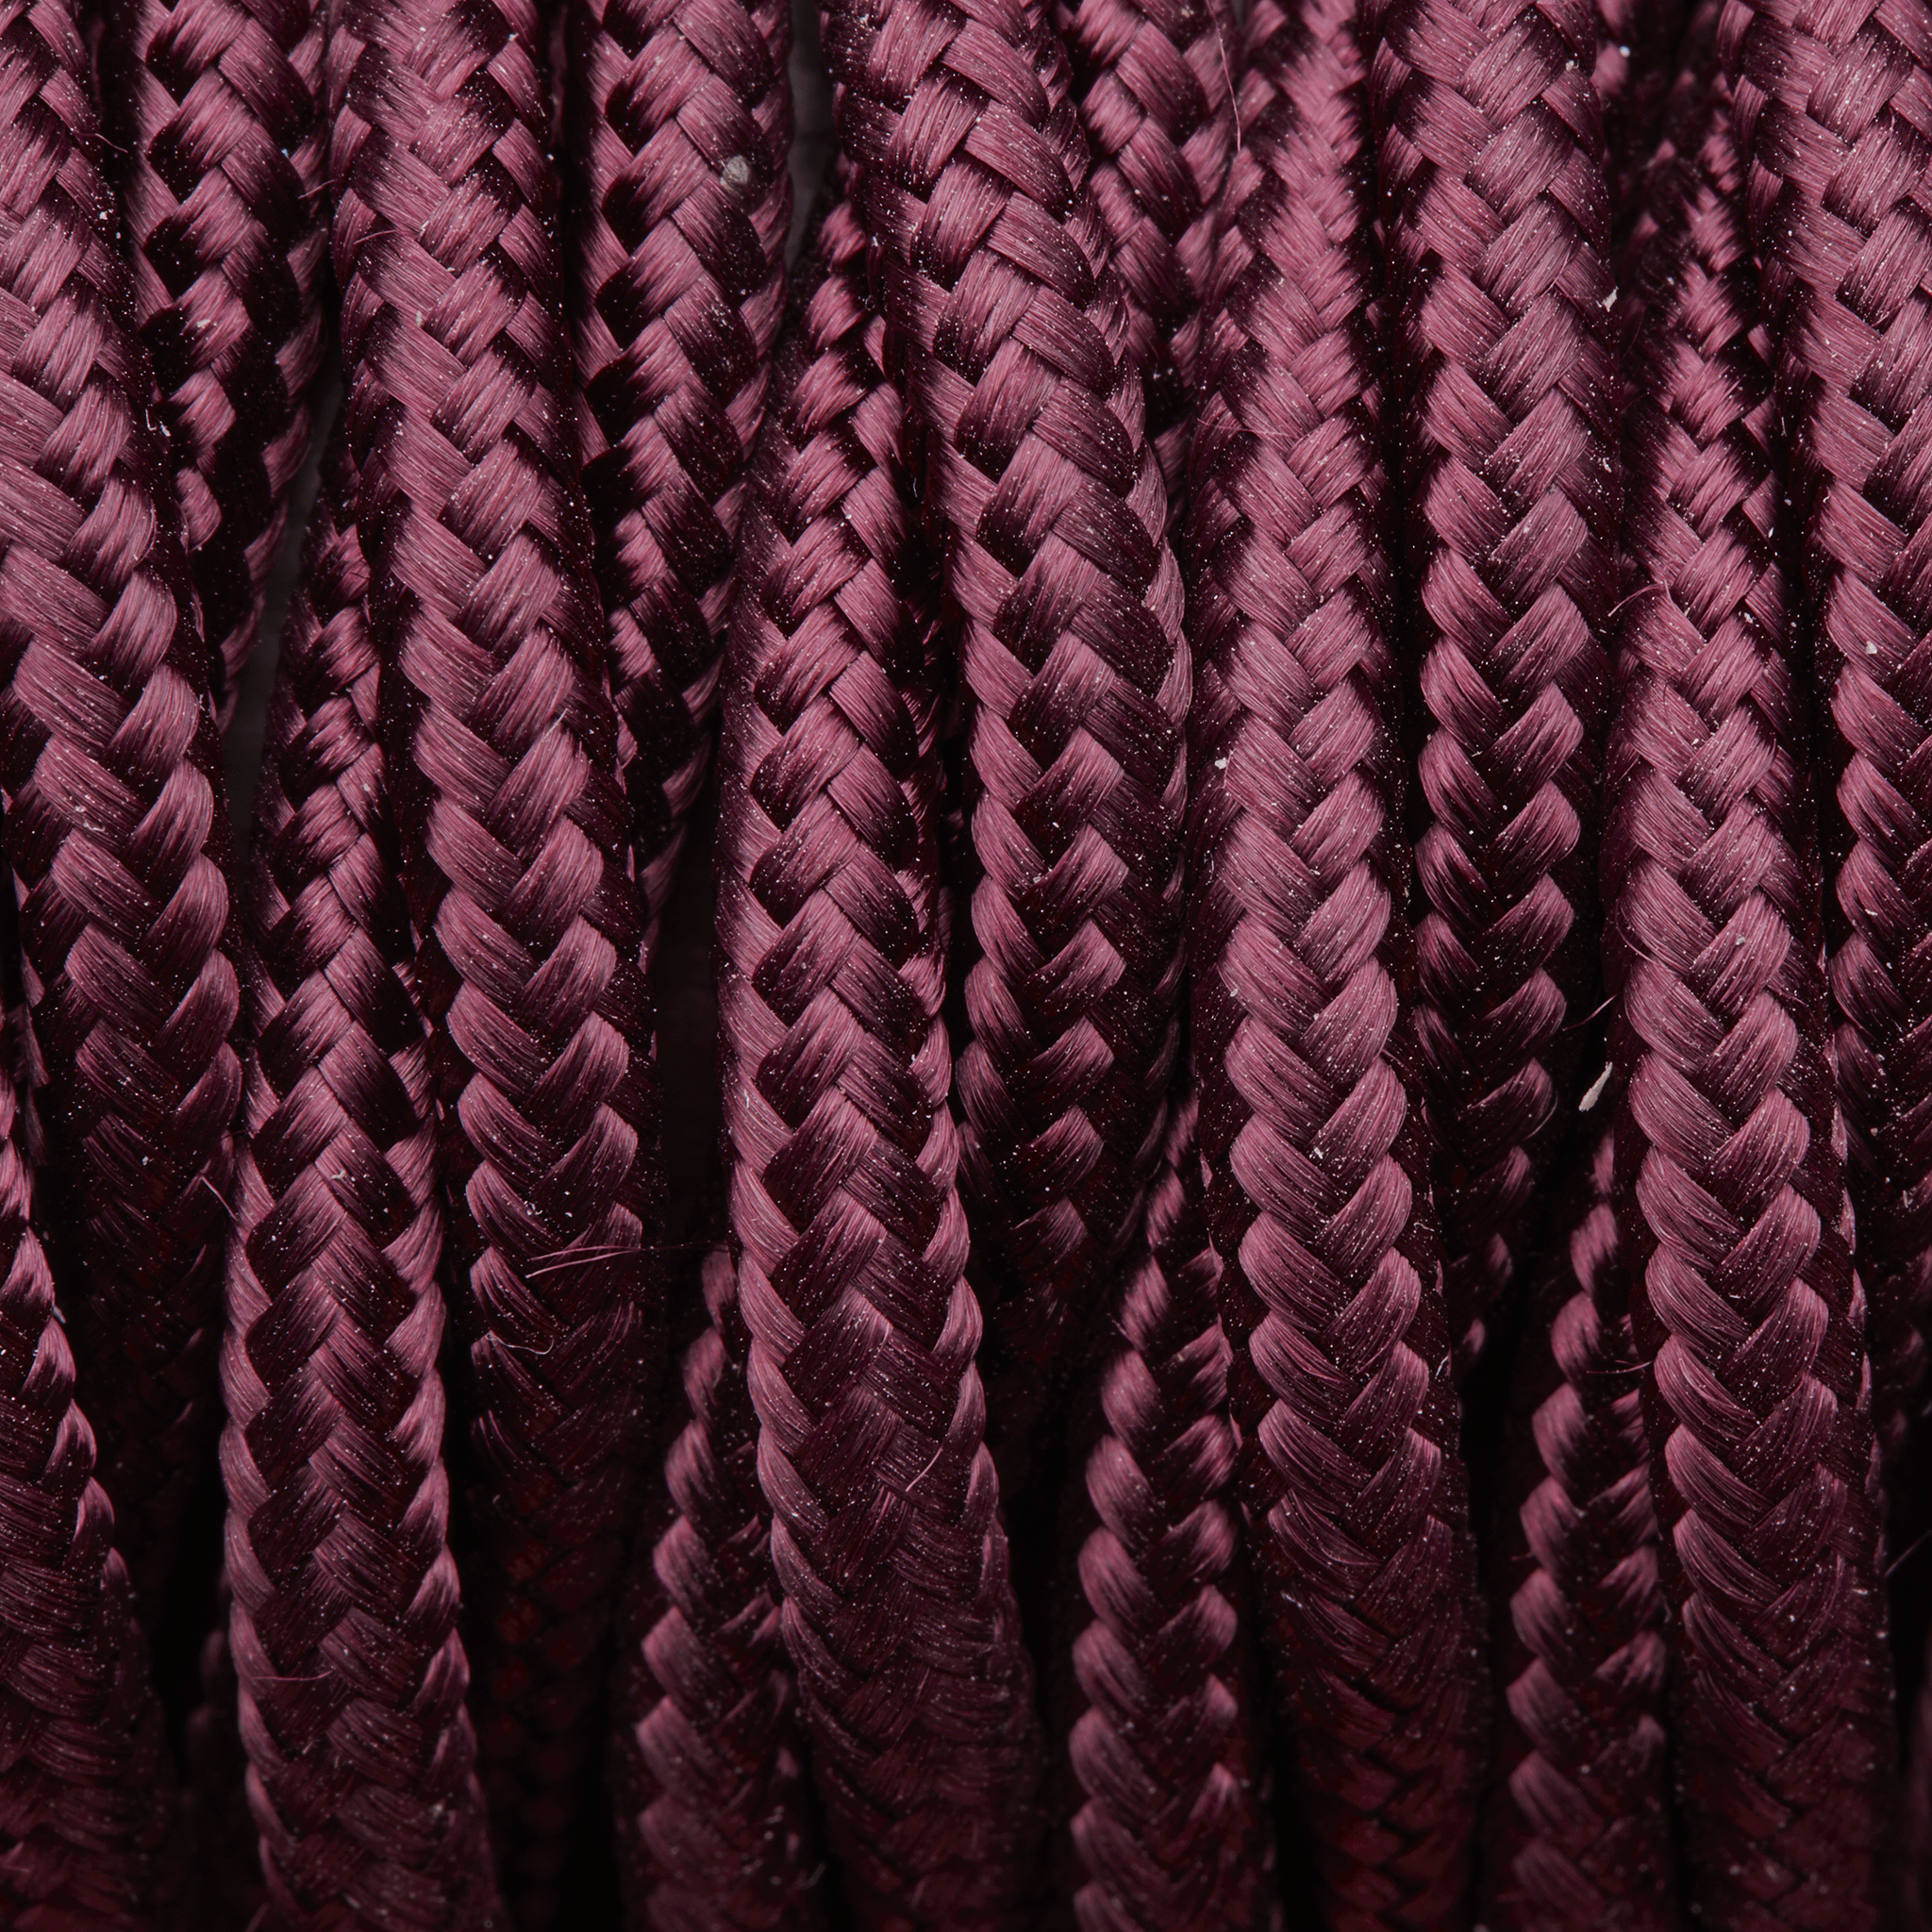 Industville – Twisted Fabric Flex – 3 Core Braided Cloth Cable Lighting Wire – Fabric Flex Cable – Purple Colour – Braided Woven Cloth Material – 100 CM